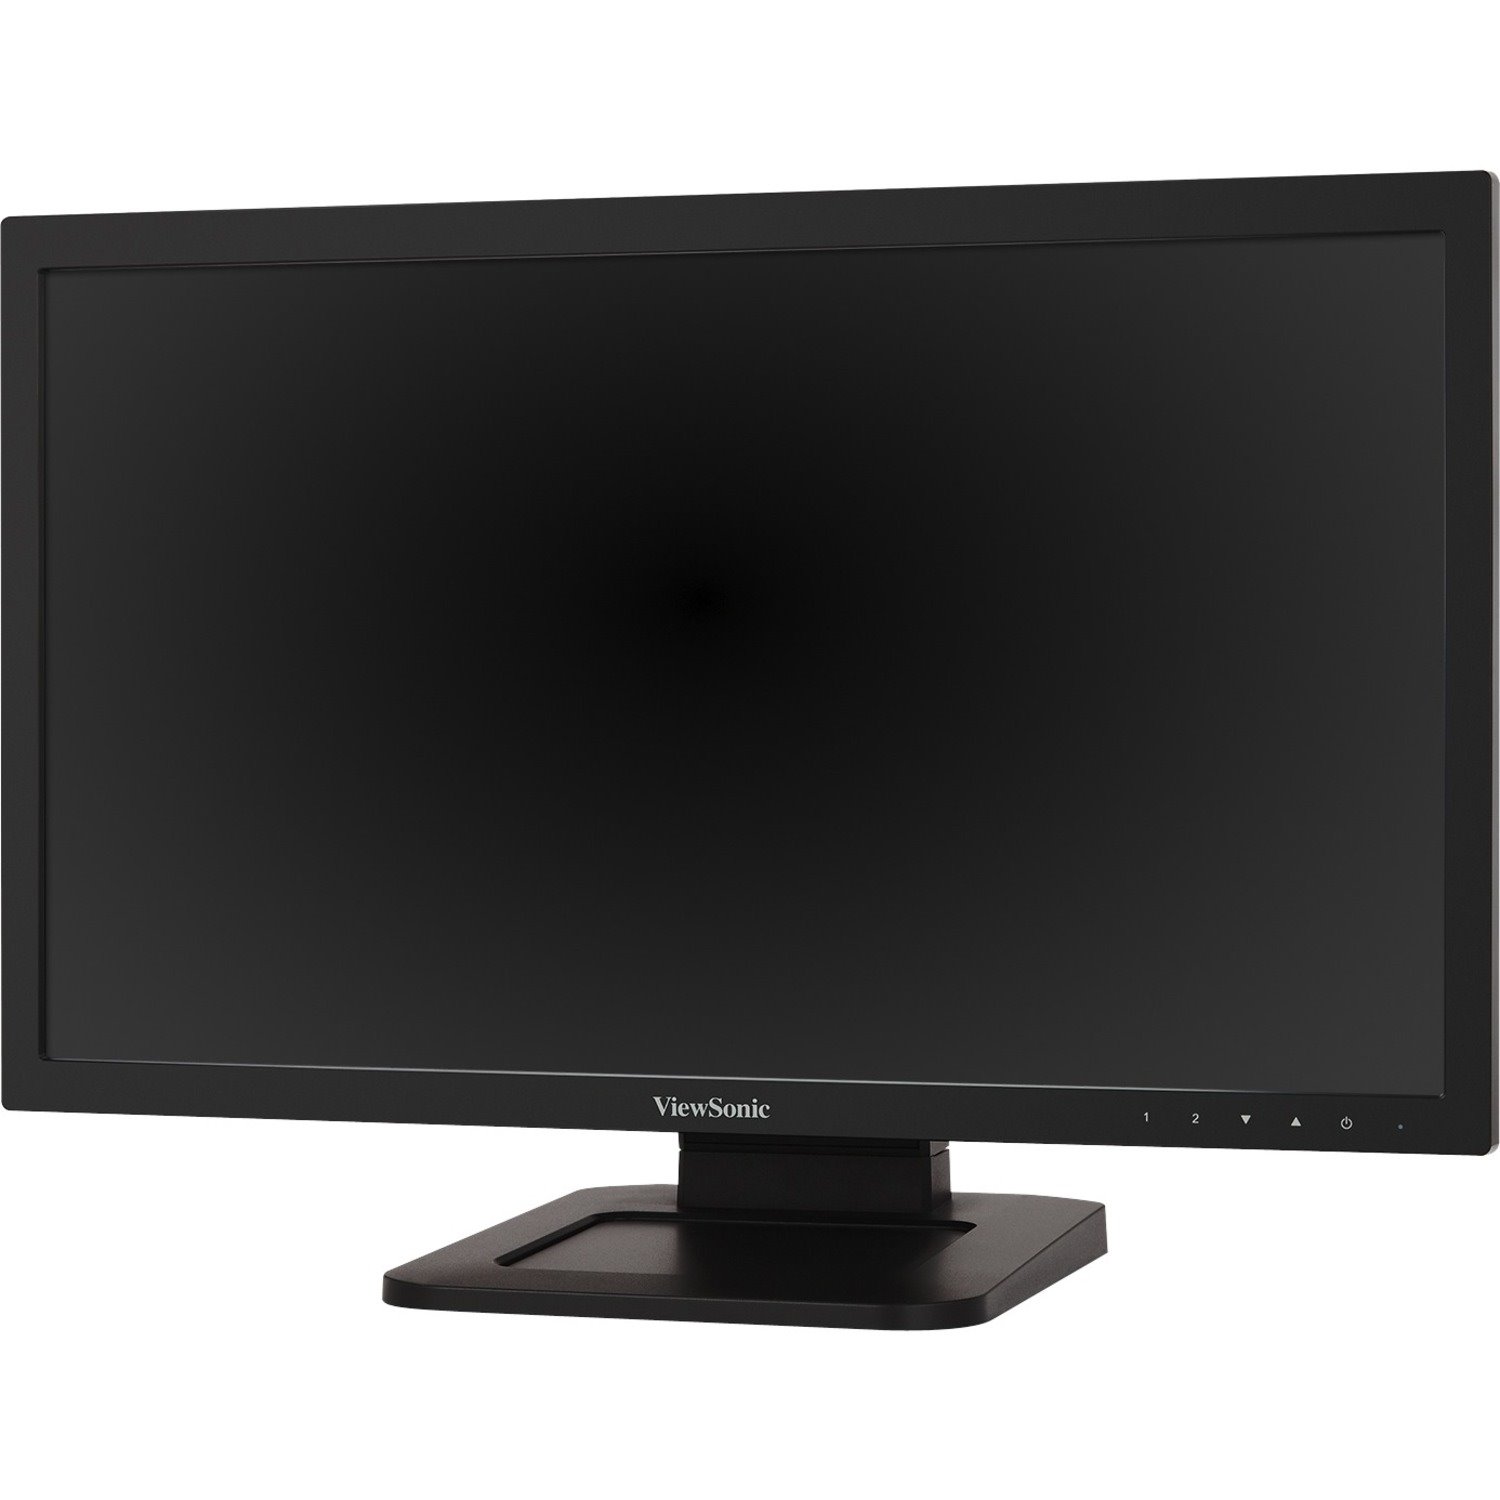 ViewSonic TD2210 22" 1080p Single Point Resistive Touch Monitor with USB, DVI and VGA